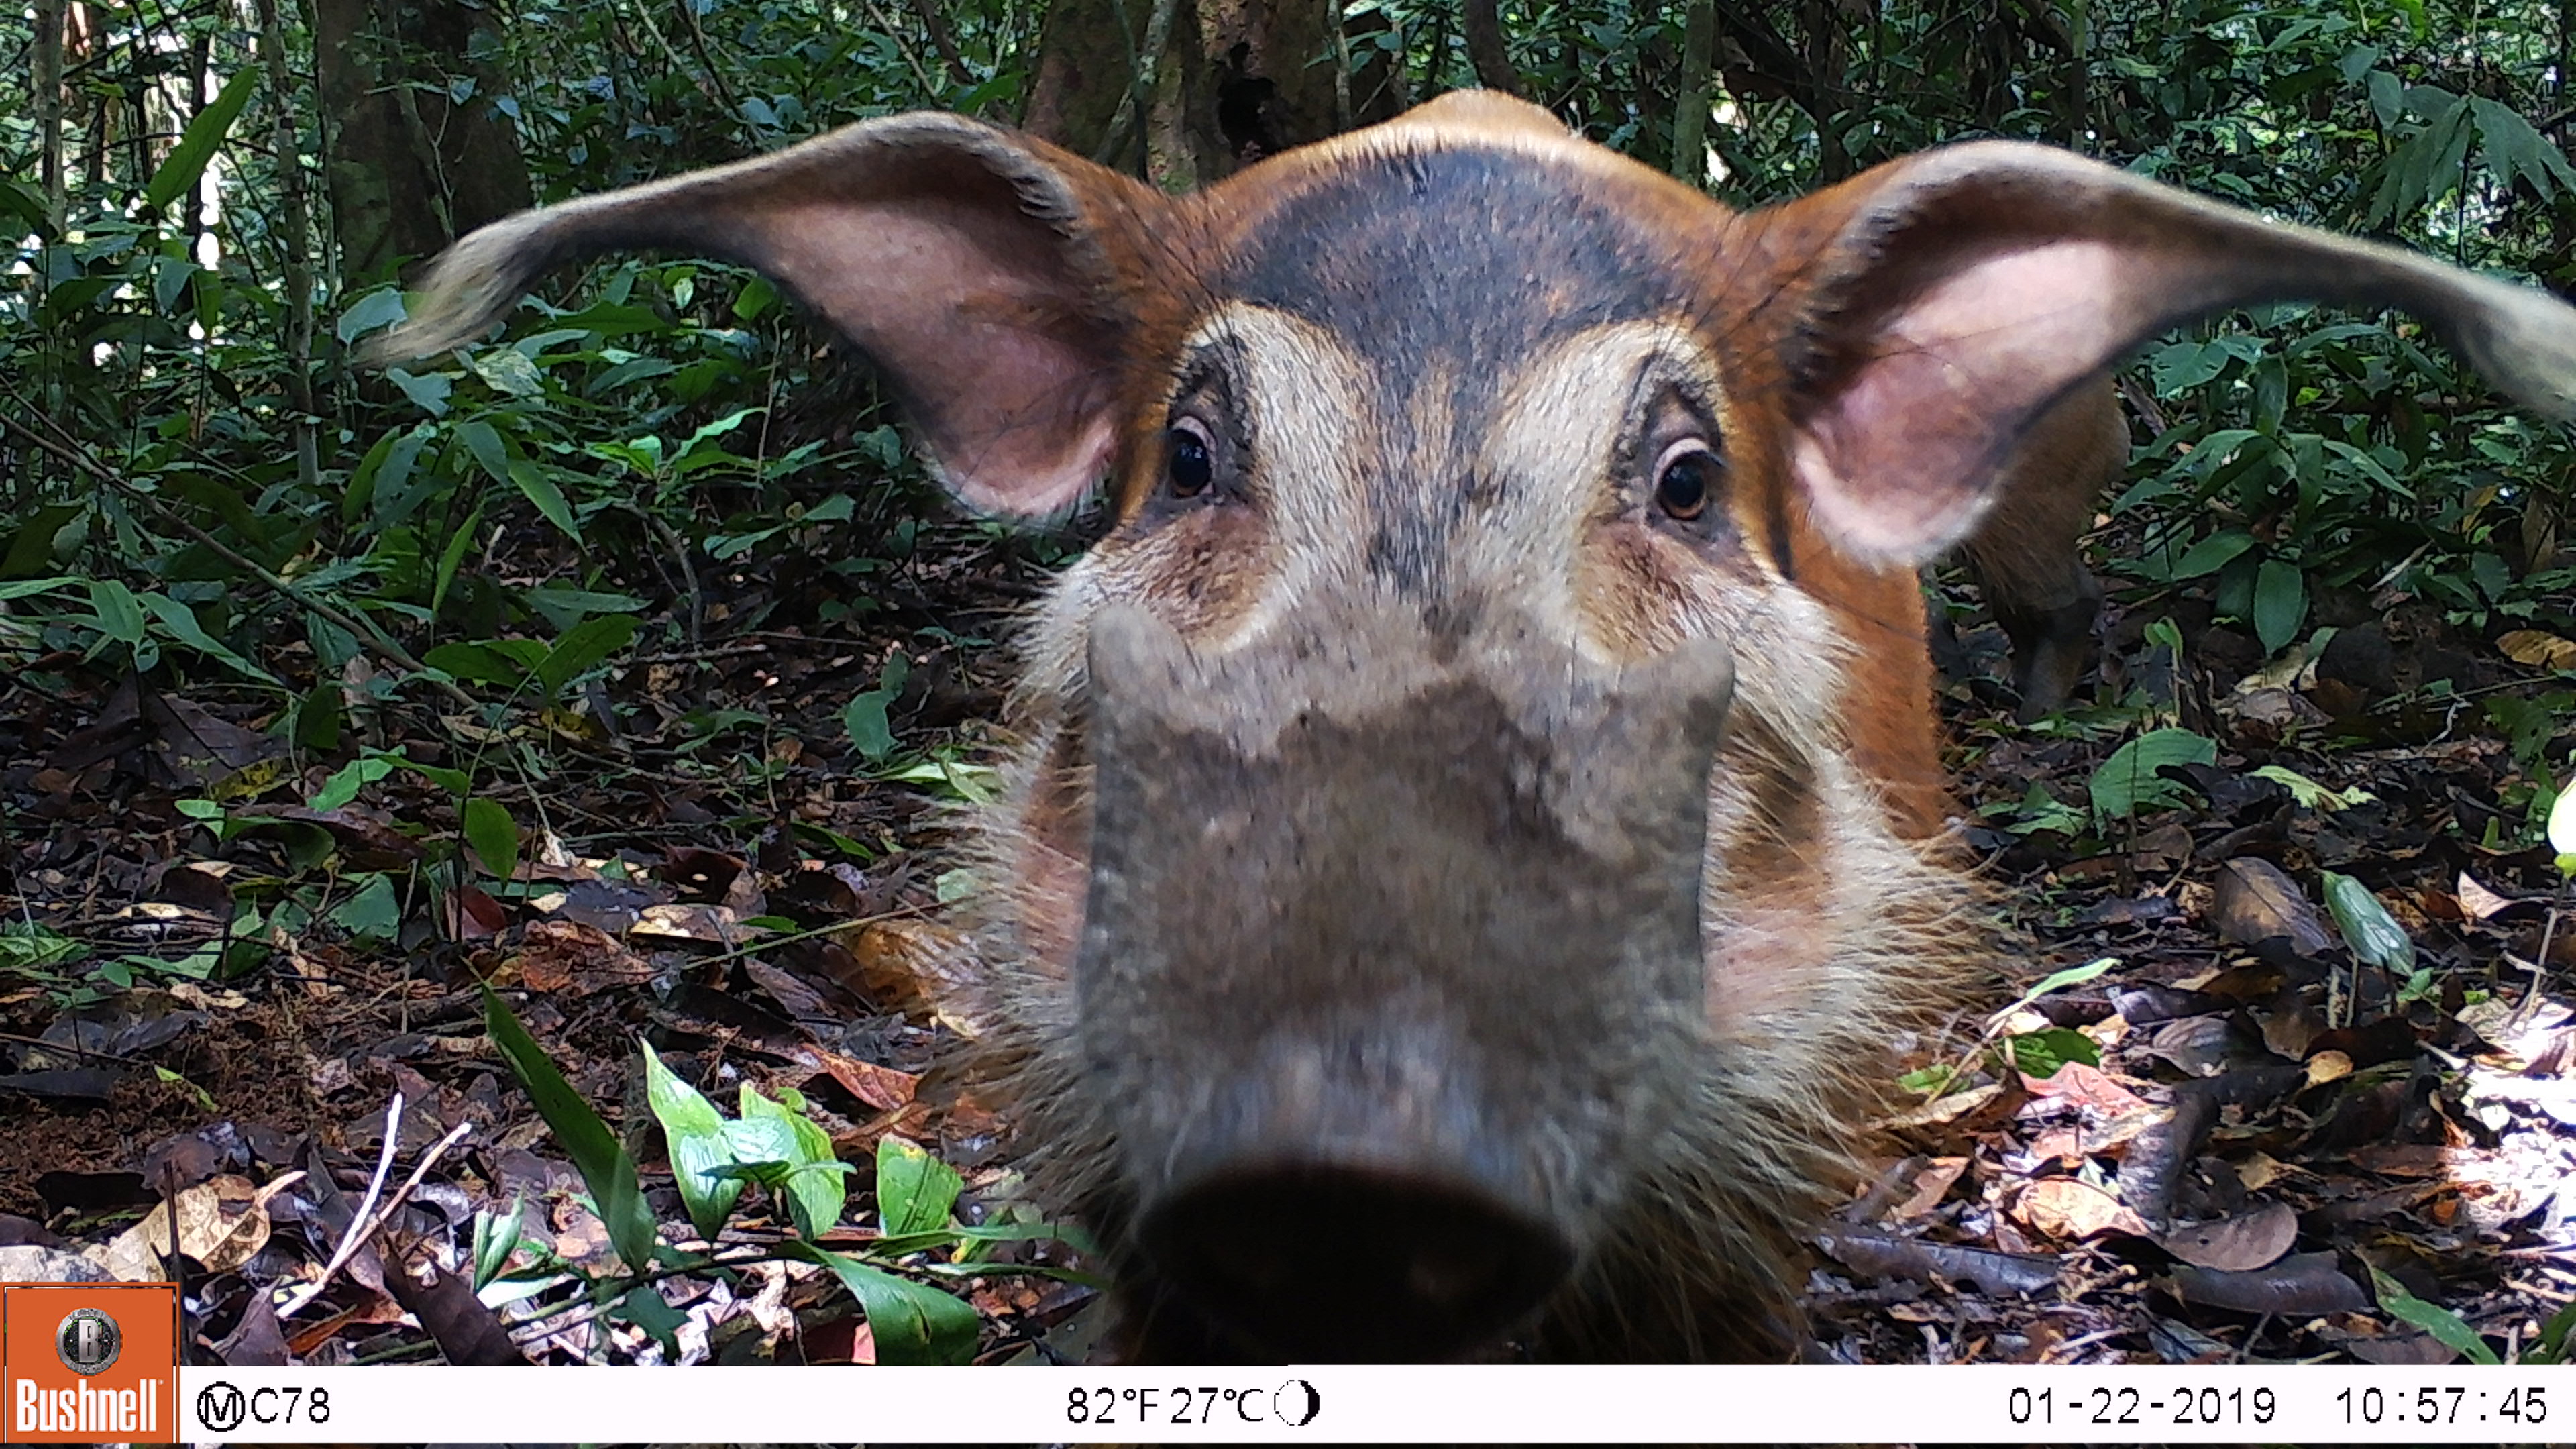 close up image of river hog from camera trap